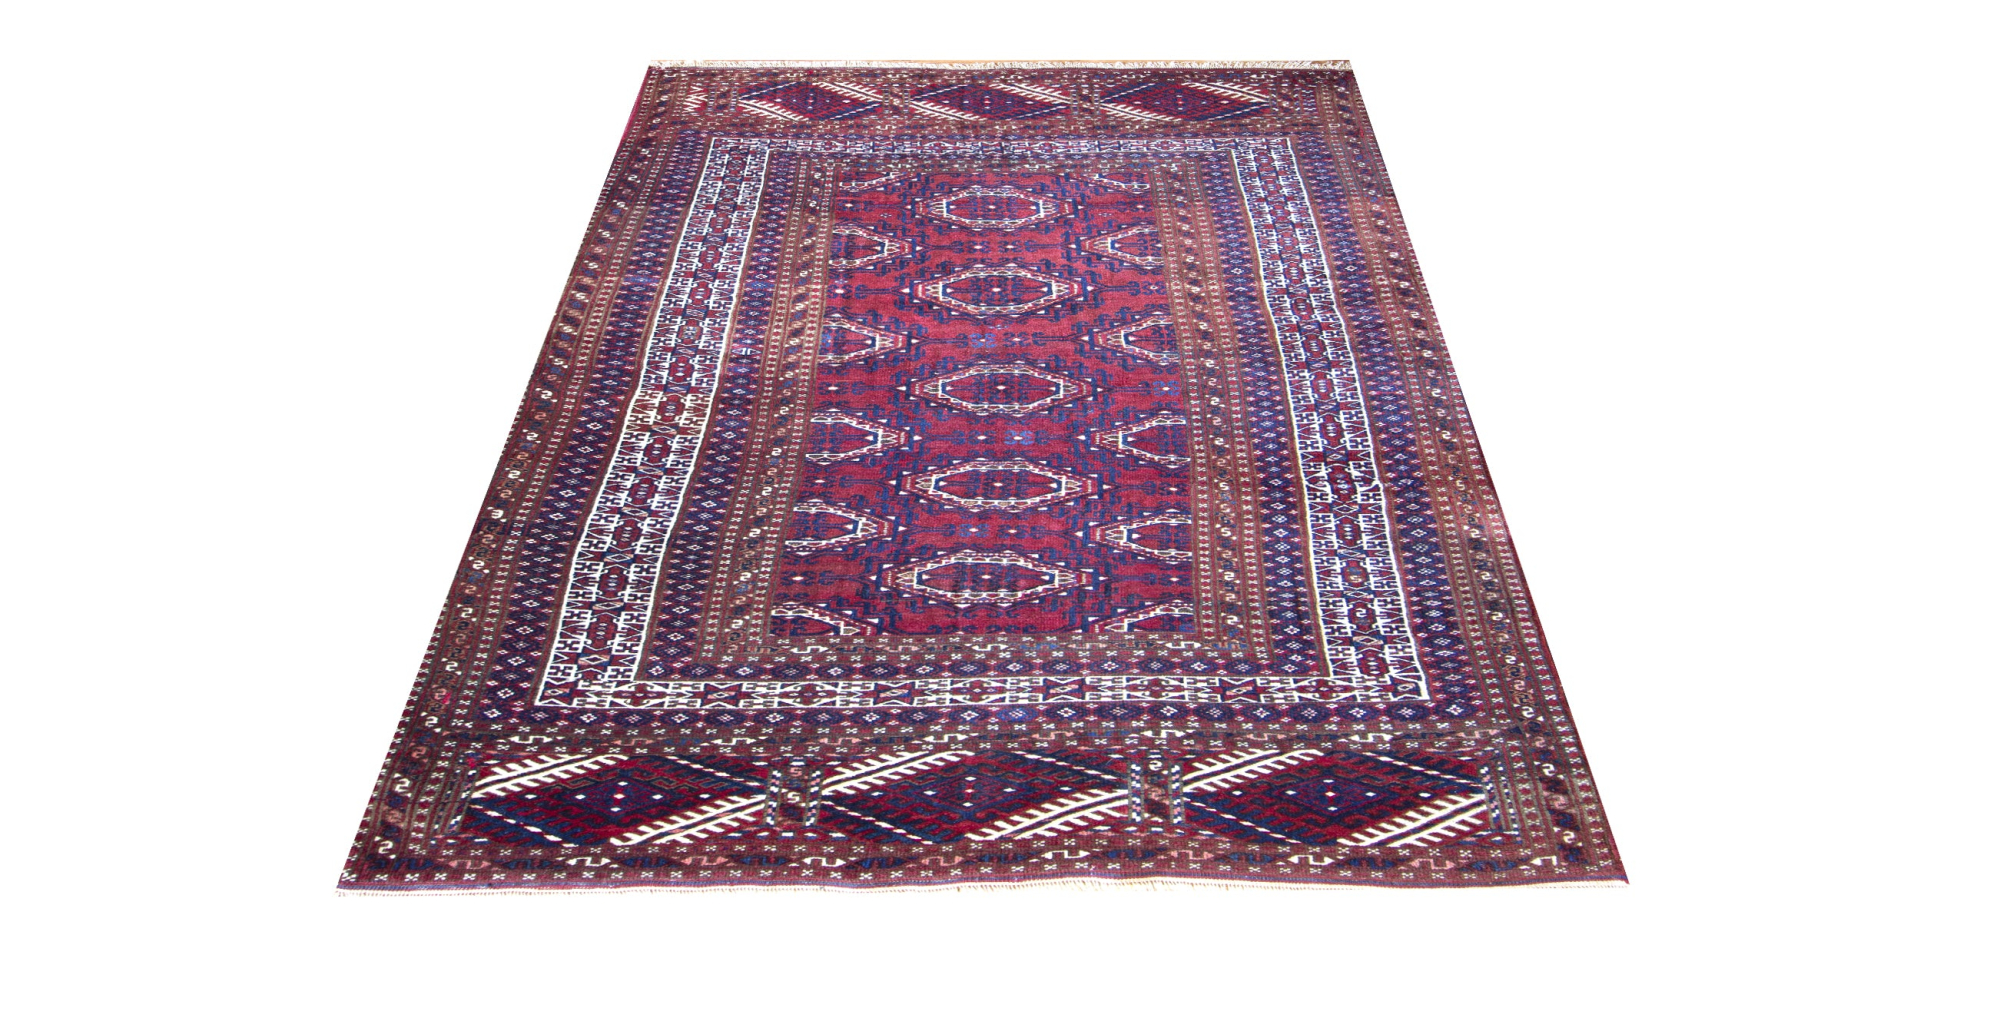 Area rug for living space and any room. Floor decor, rugs and carpets from Tabrizi Rugs. Torkman 145 - 4'2